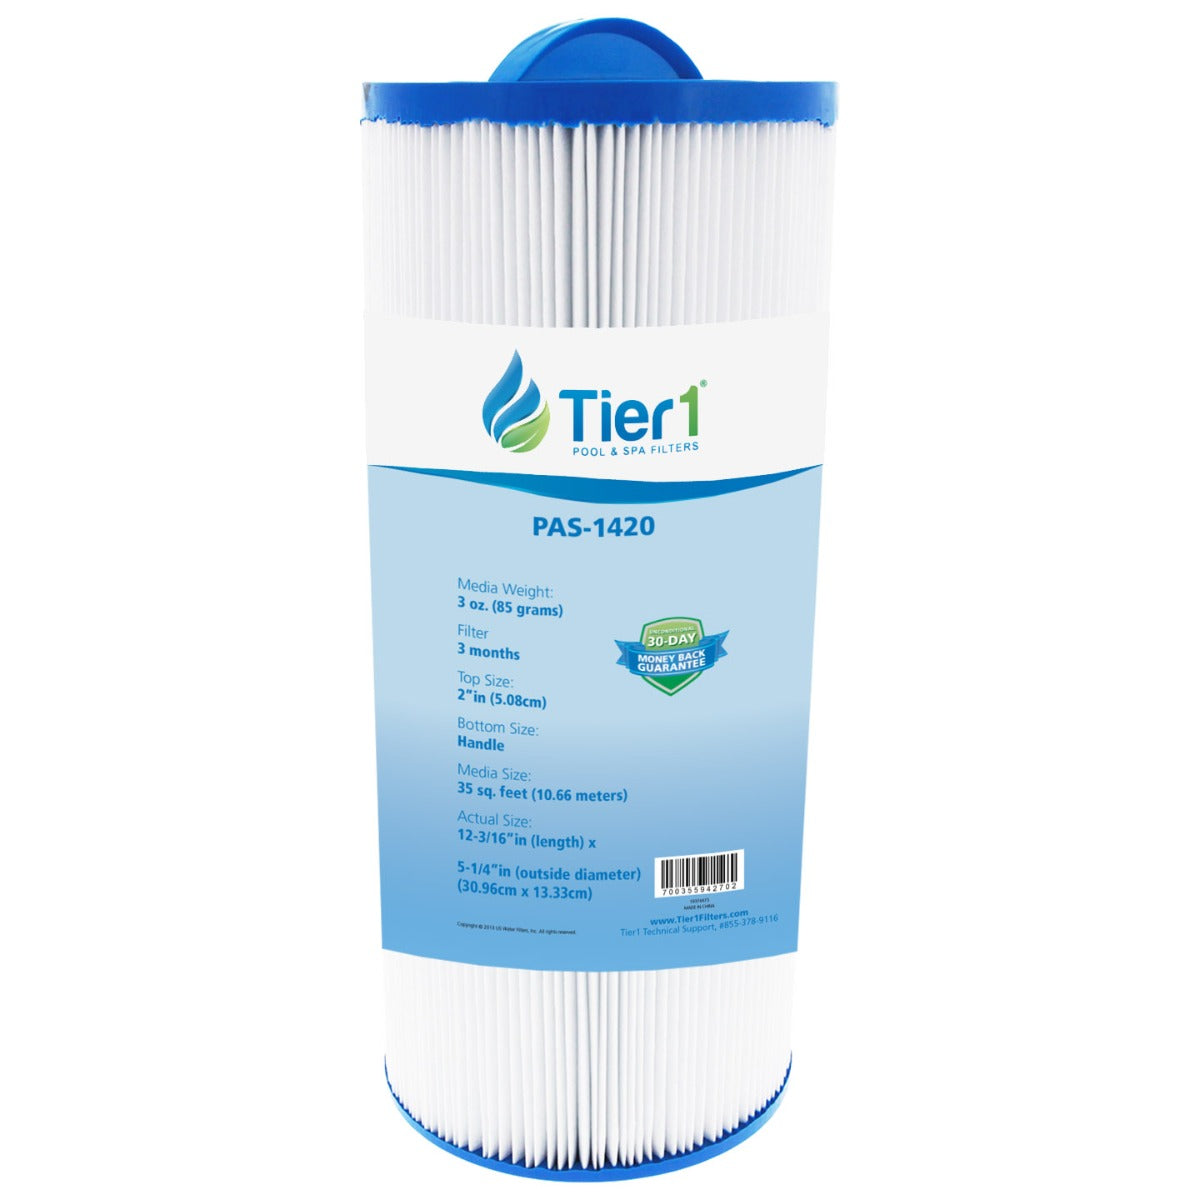 Tier1 Brand Replacement Pool and Spa Filter for 20042, 370-0242 & 370-0243